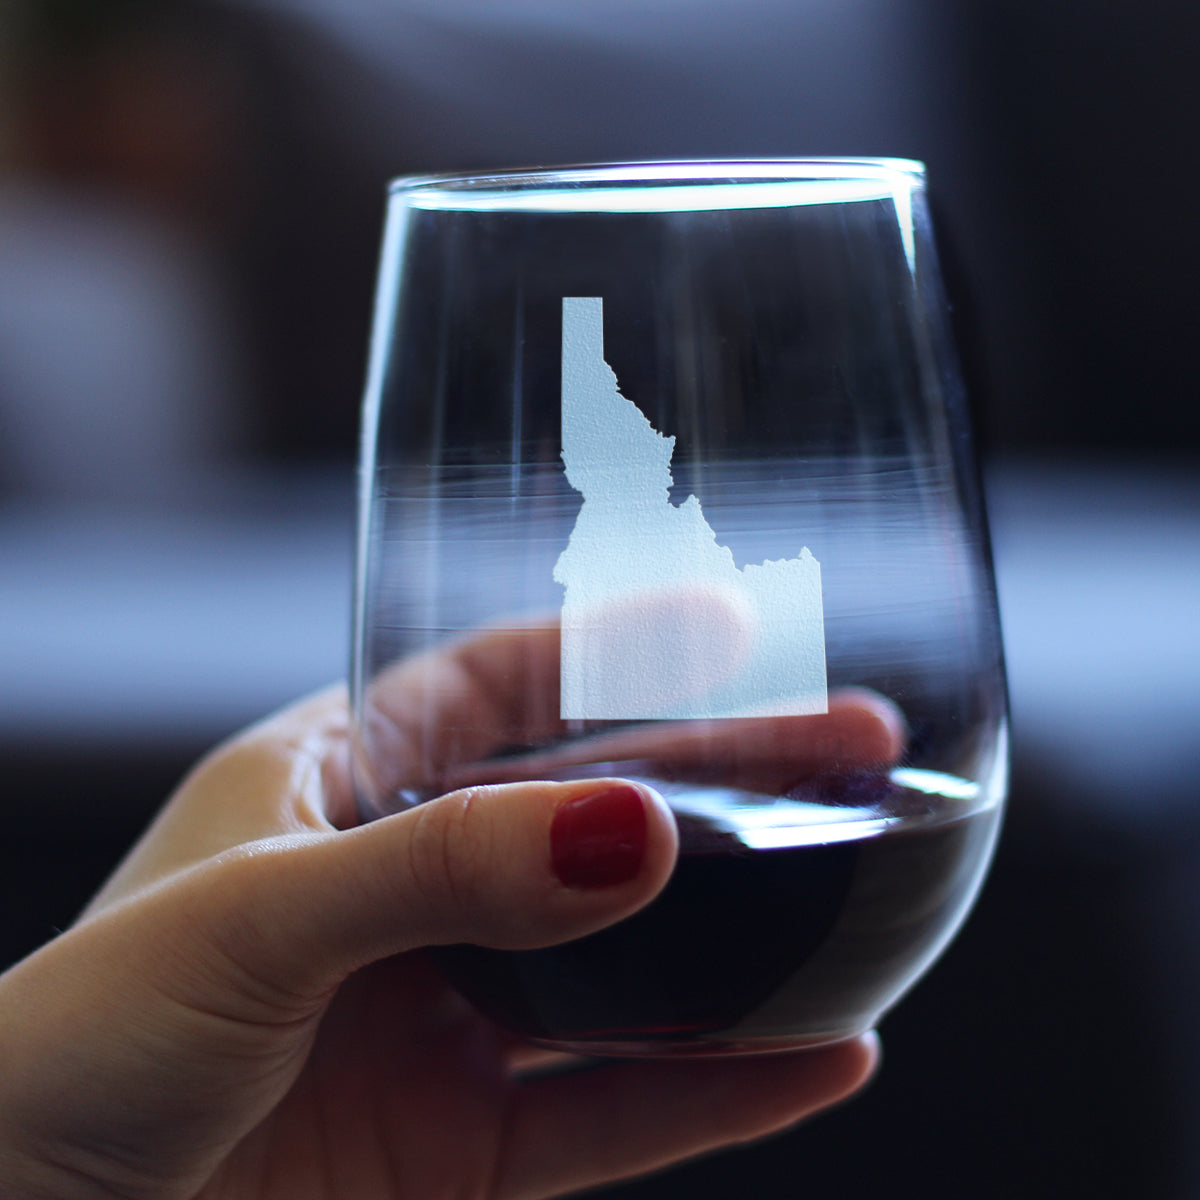 Idaho State Outline Stemless Wine Glass - State Themed Drinking Decor and Gifts for Idahoan Women &amp; Men - Large 17 Oz Glasses